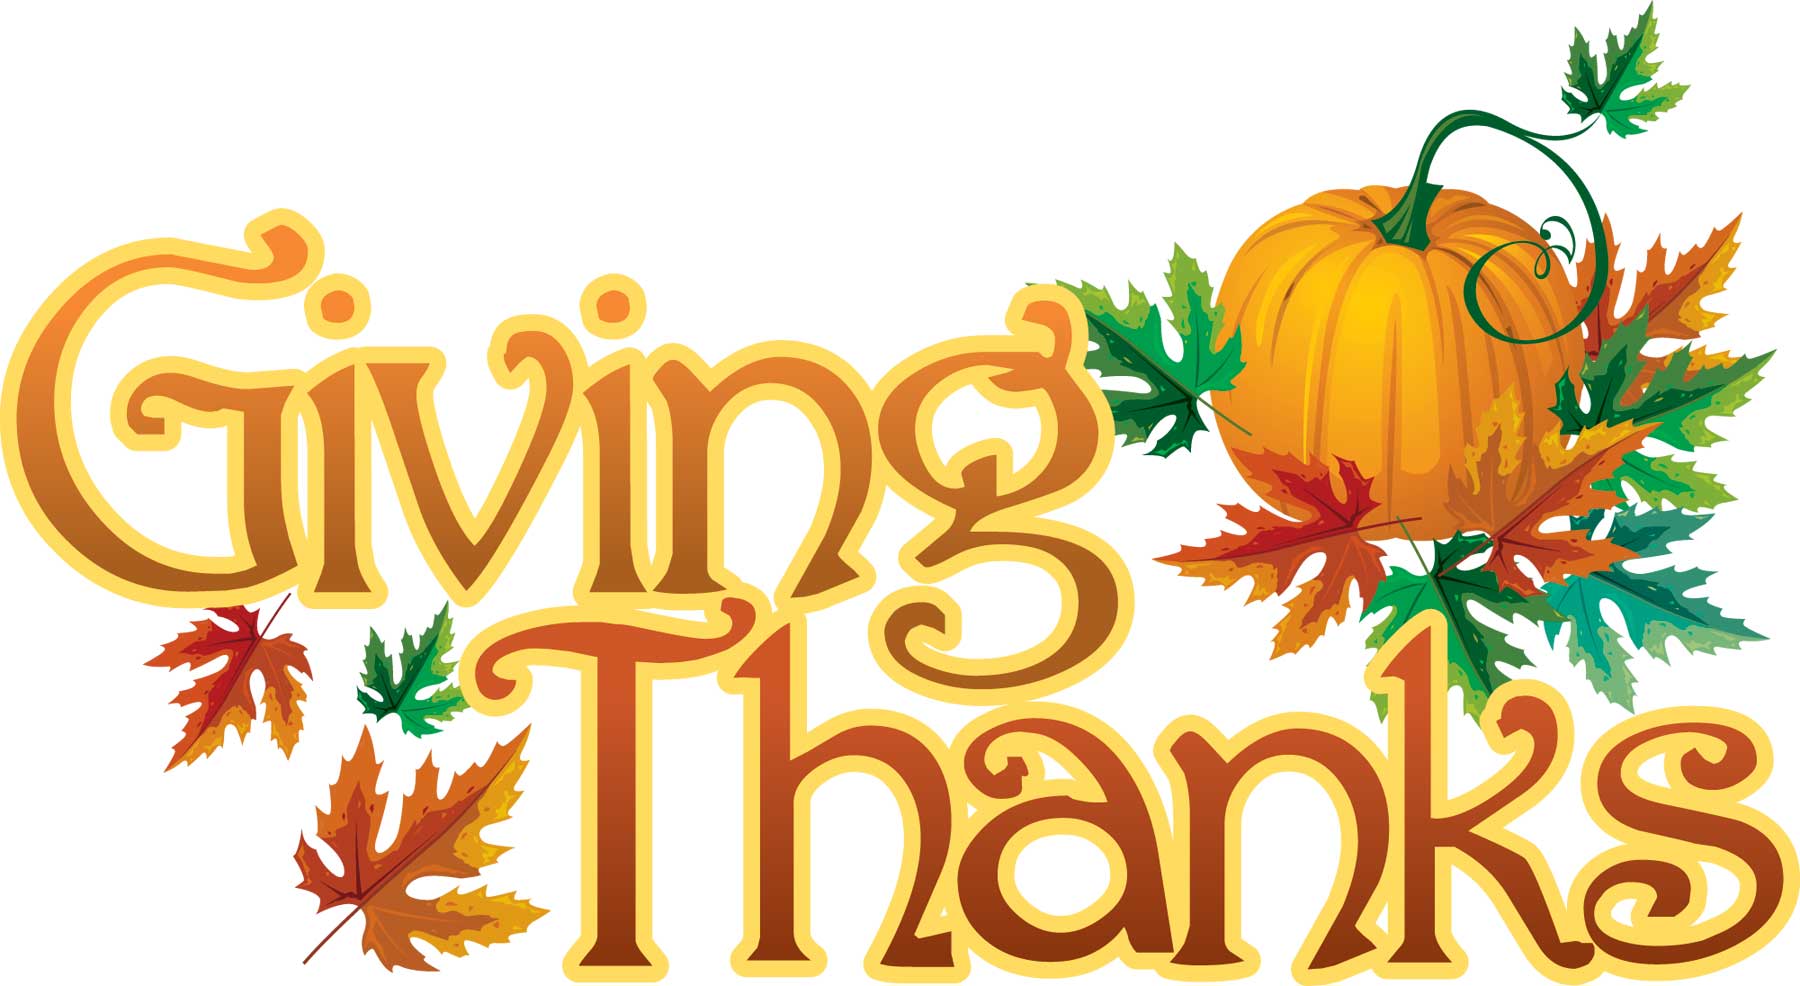 Free Thanksgiving Clipart 2020 - Thanksgiving Clipart Images & Pictures